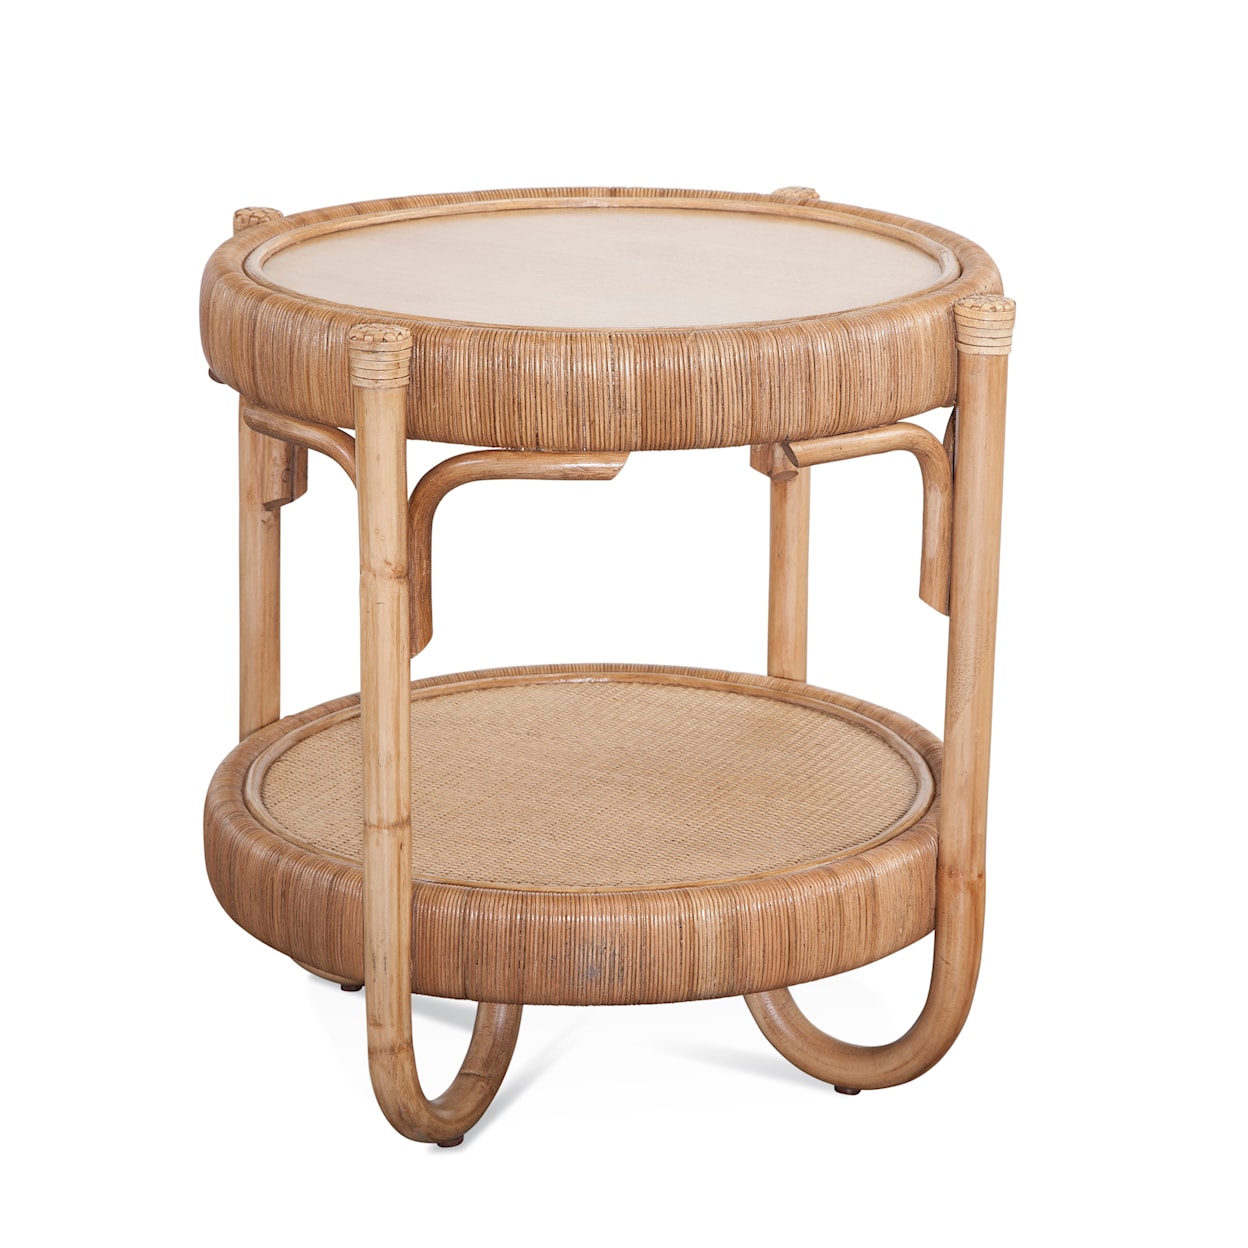 Braxton Culler Willow Creek Willow Creek End Table